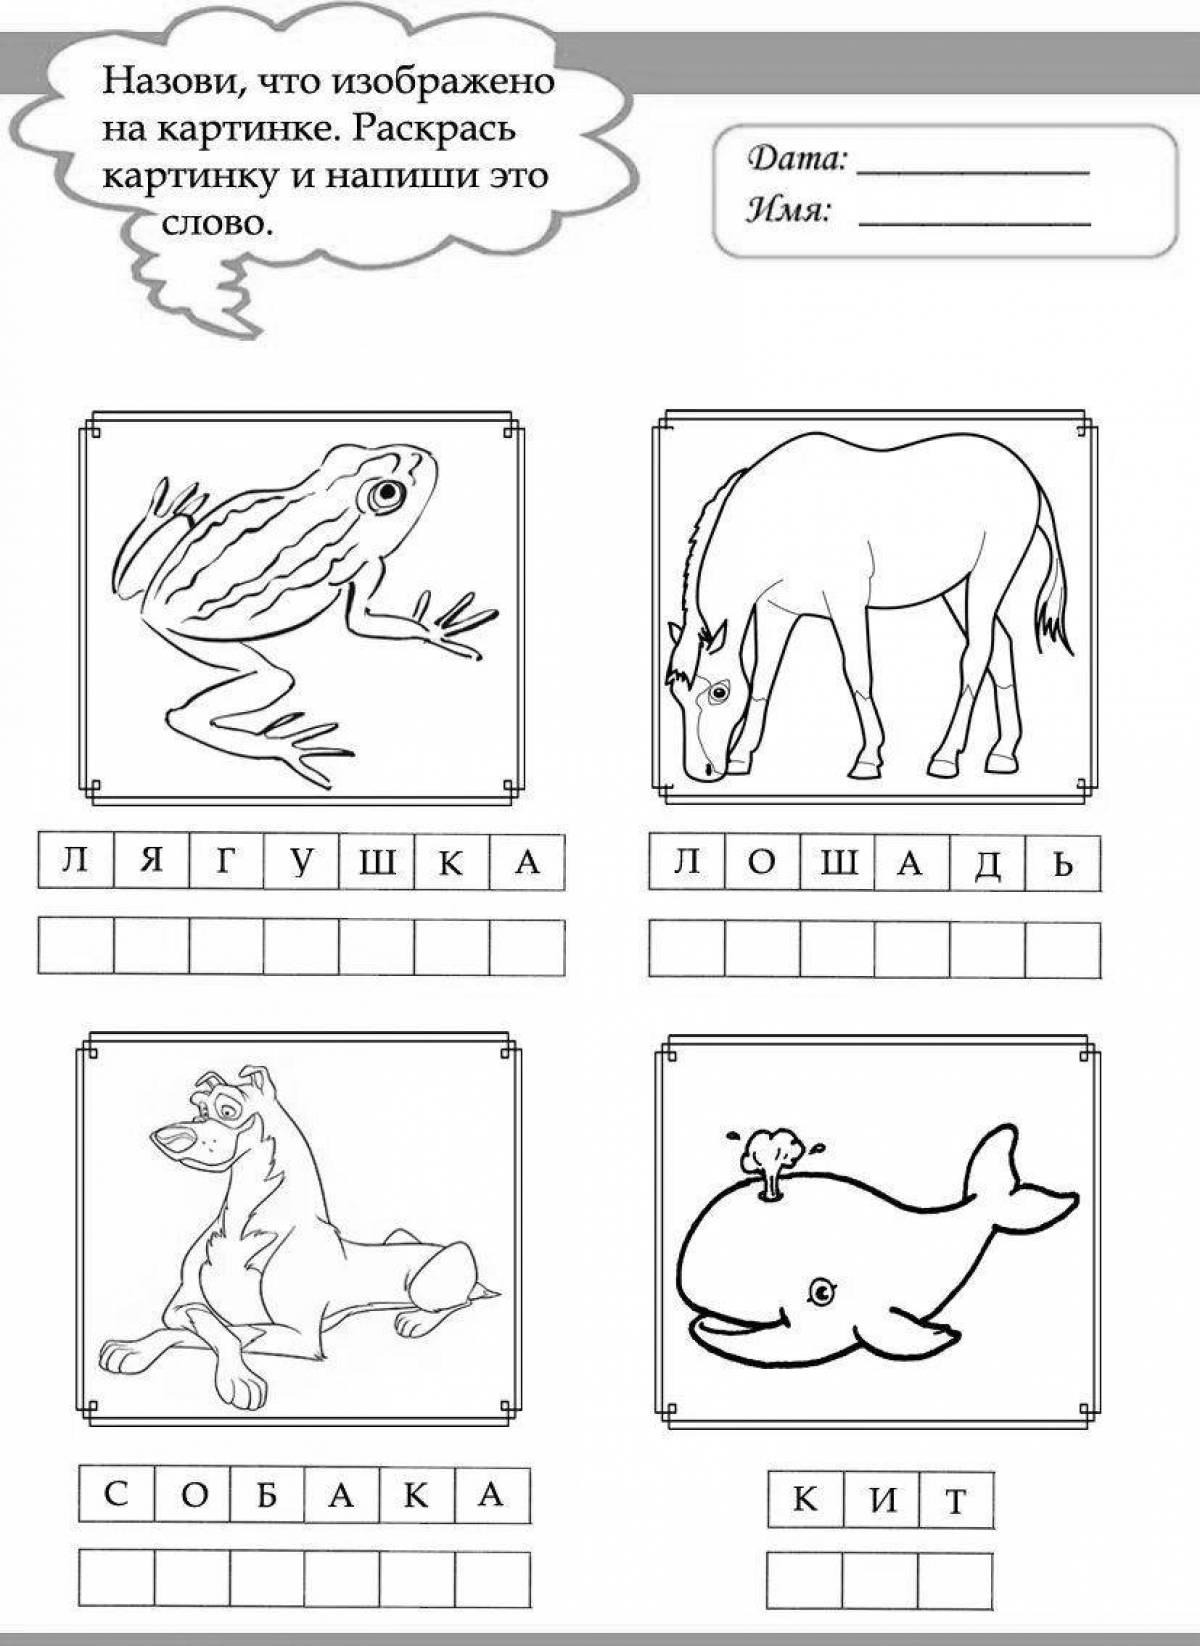 Coloring page charming 1st school of russia